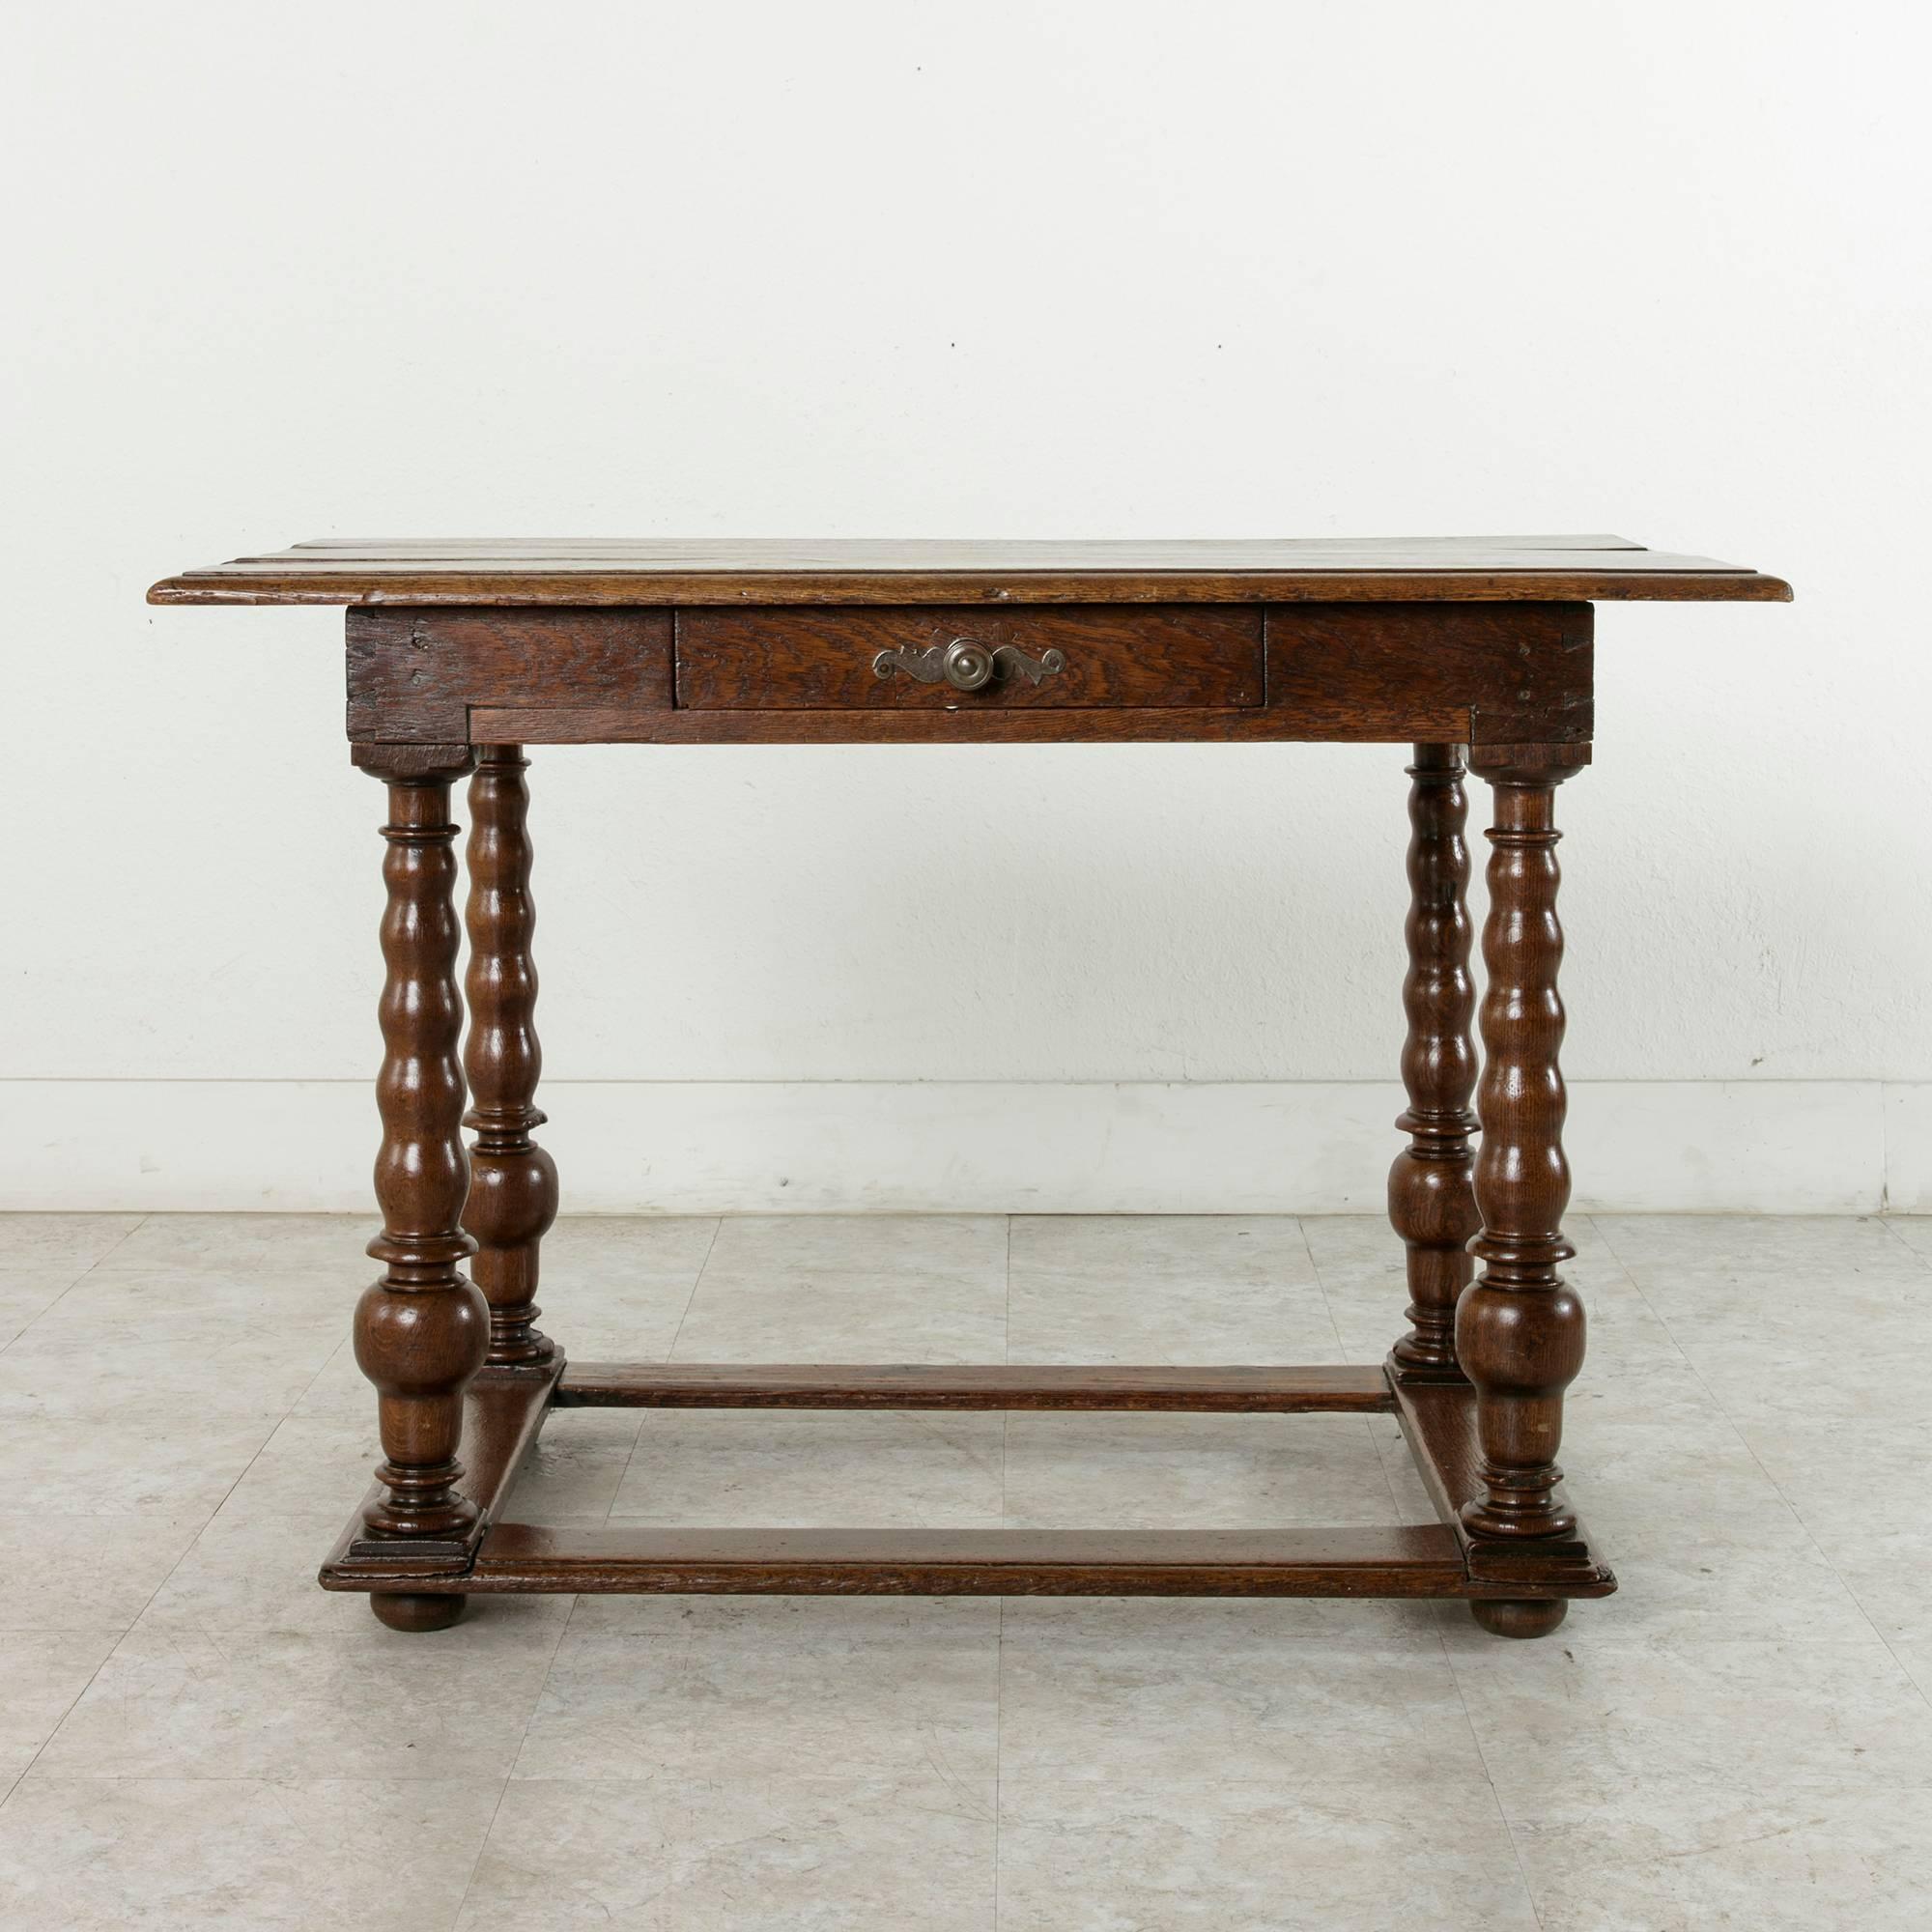 This Louis XIII period French oak table from the 17th century is of dovetailed and hand-pegged construction. Its beveled top formed from three planks of wood rests over a single drawer with hand-cut dovetails at both the front and back of the